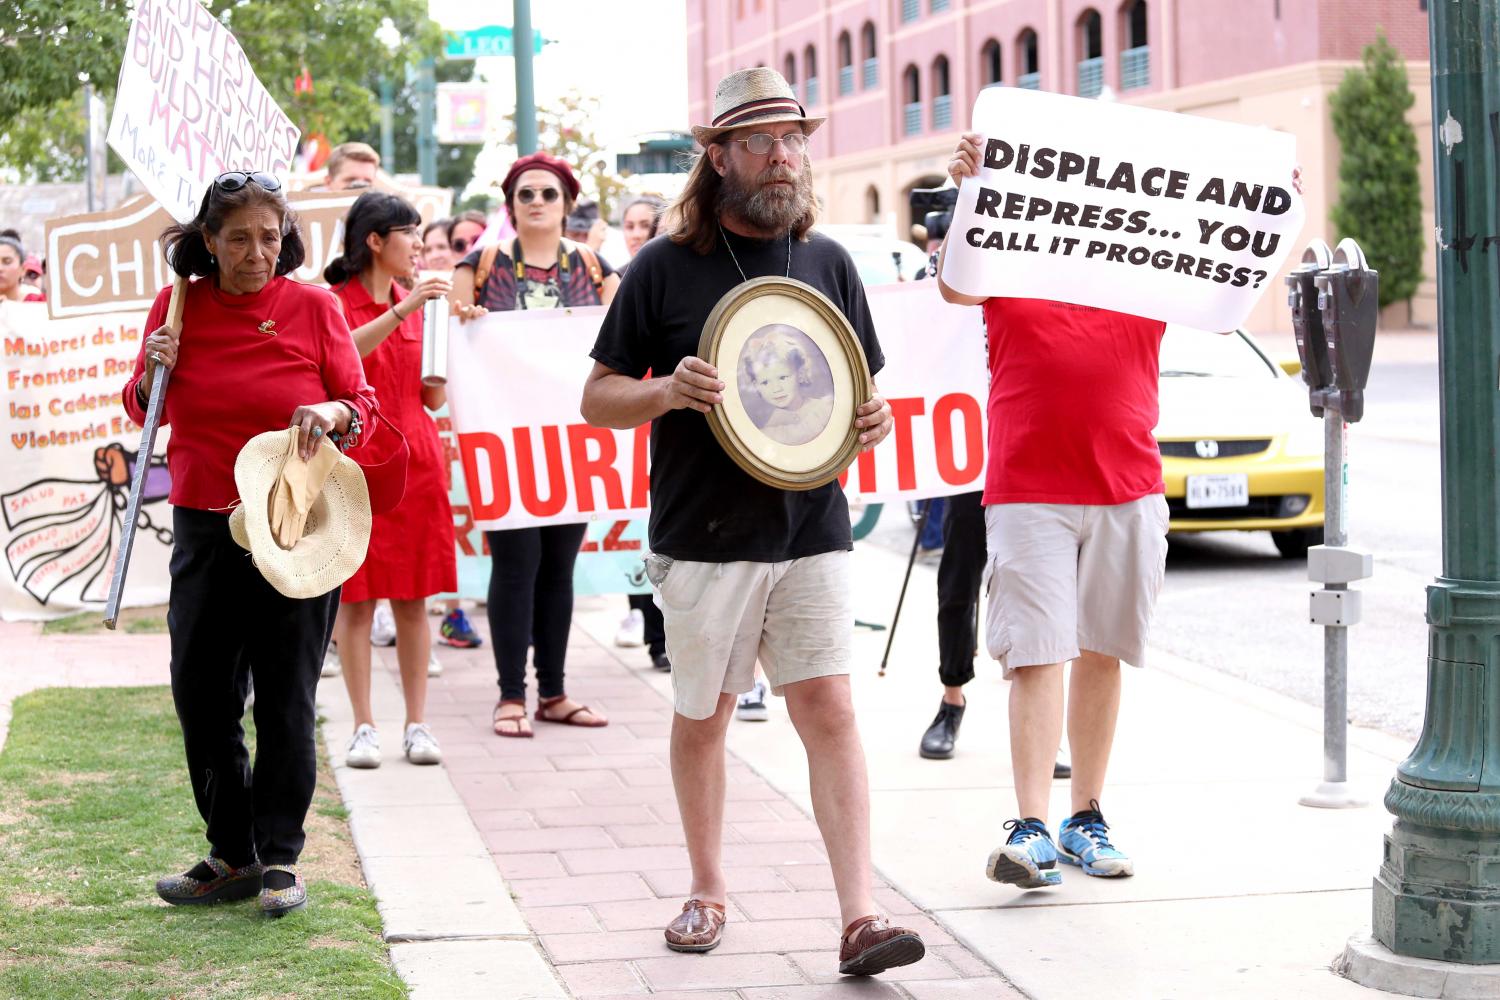 Duranguito+solidarity+march+advocates+for+preservation+of+community